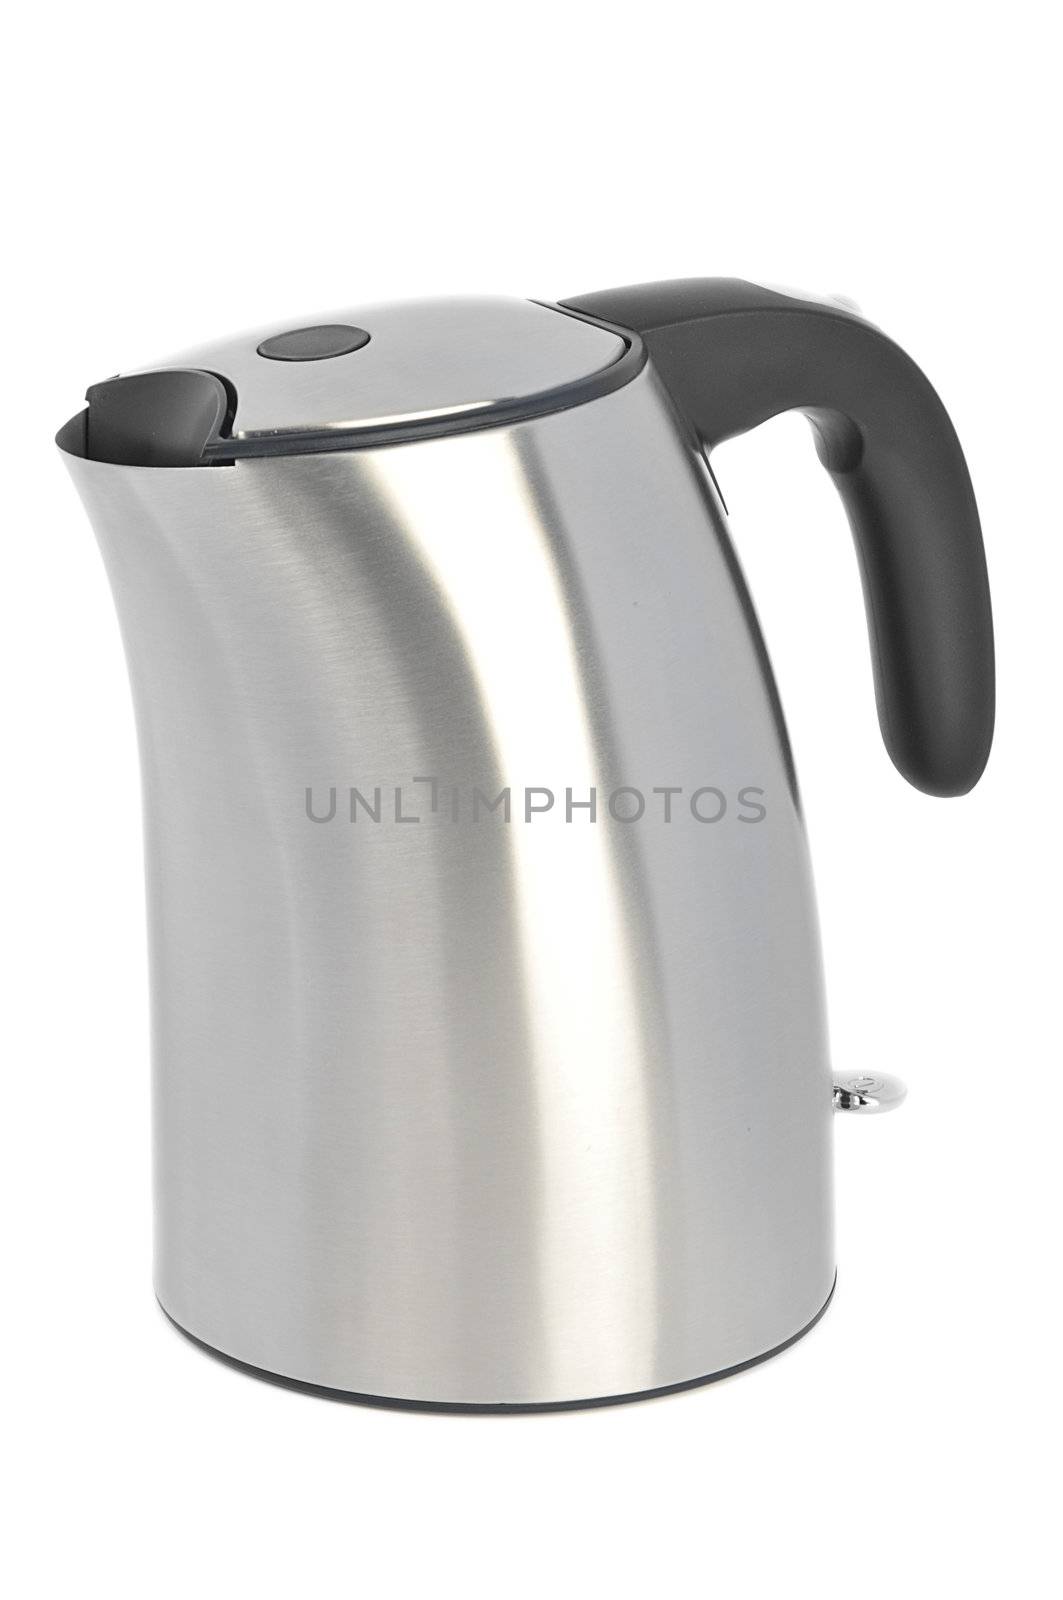 Metallic electric kettle isolated on white background